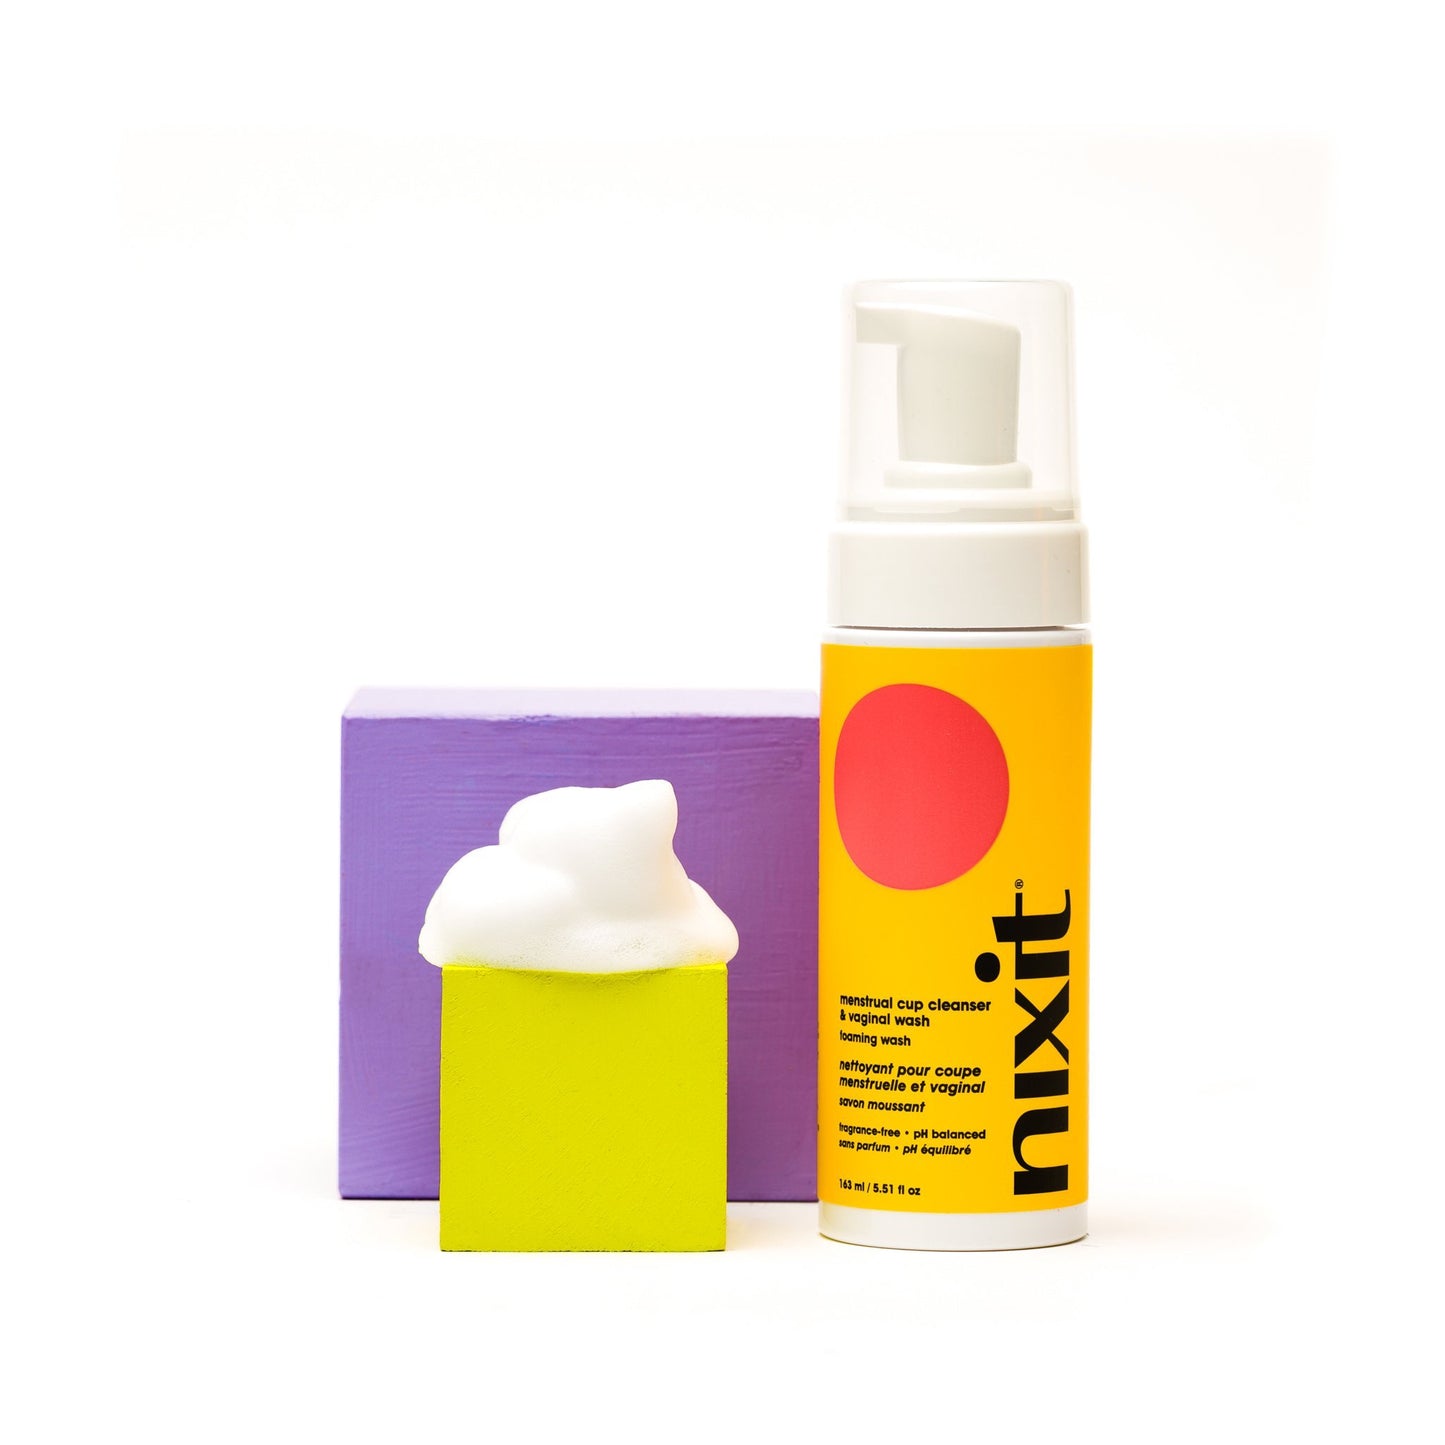 Product photo of nixit menstrual cup cleanser and vaginal wash and foam to show the texture